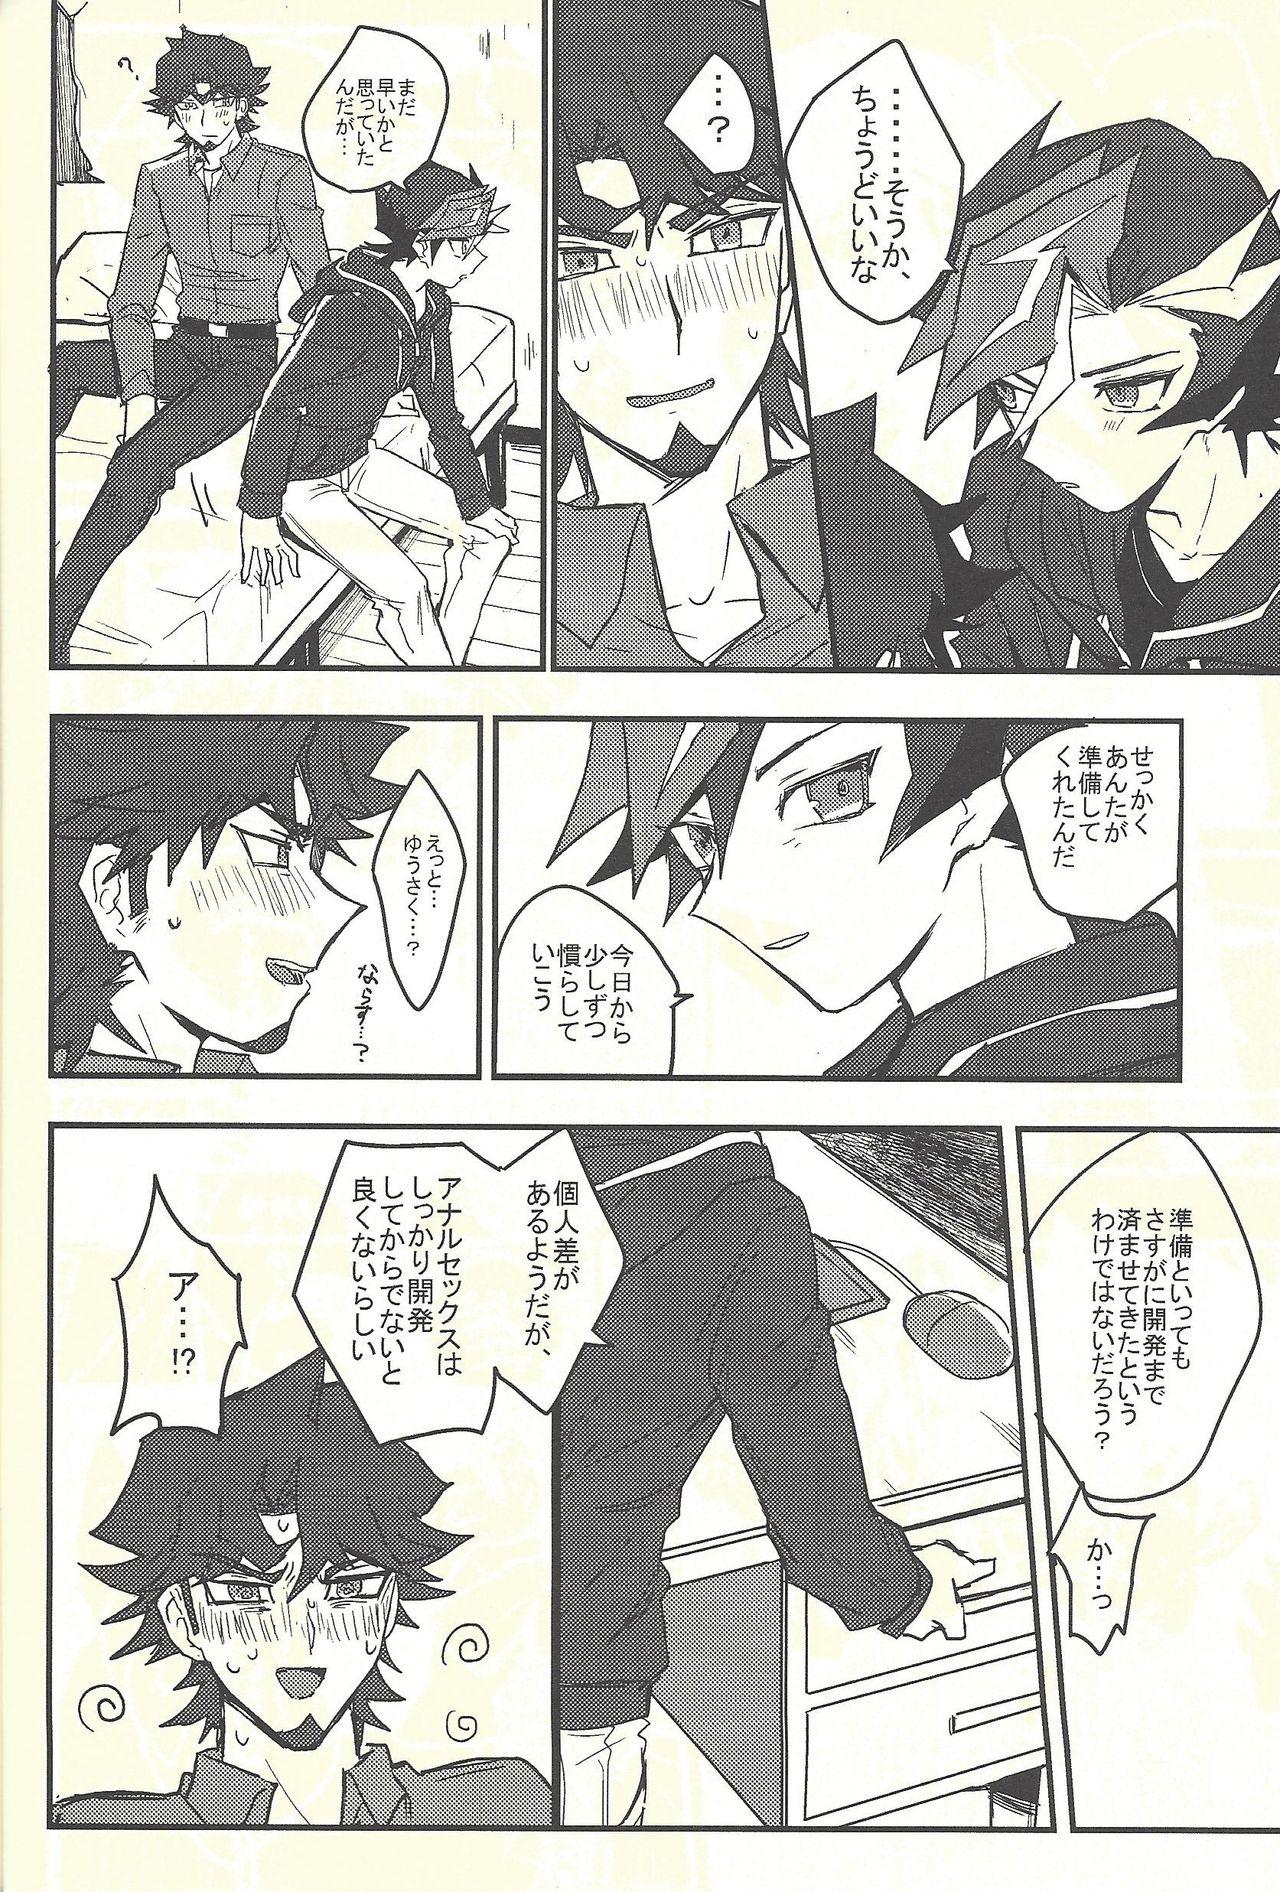 Shorts Develop You! - Yu-gi-oh vrains Scandal - Page 6